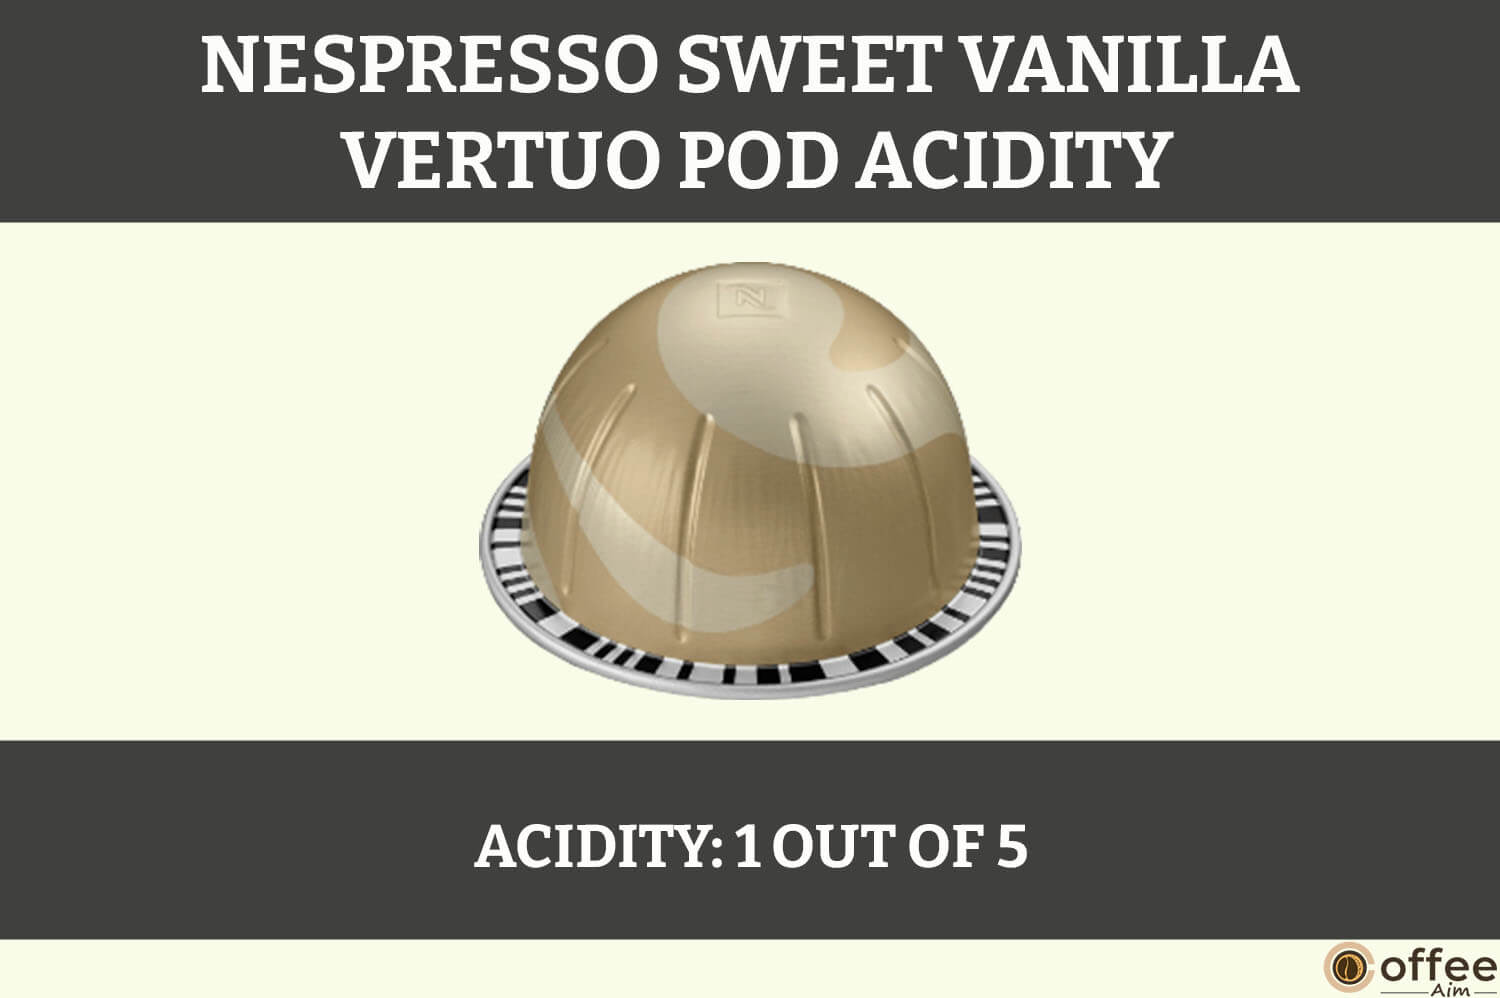 This image visually depicts the acidity profile of the Nespresso Sweet Vanilla Vertuo Pod, serving as a companion visual for the article titled 'Nespresso Sweet Vanilla Vertuo Pod Review'